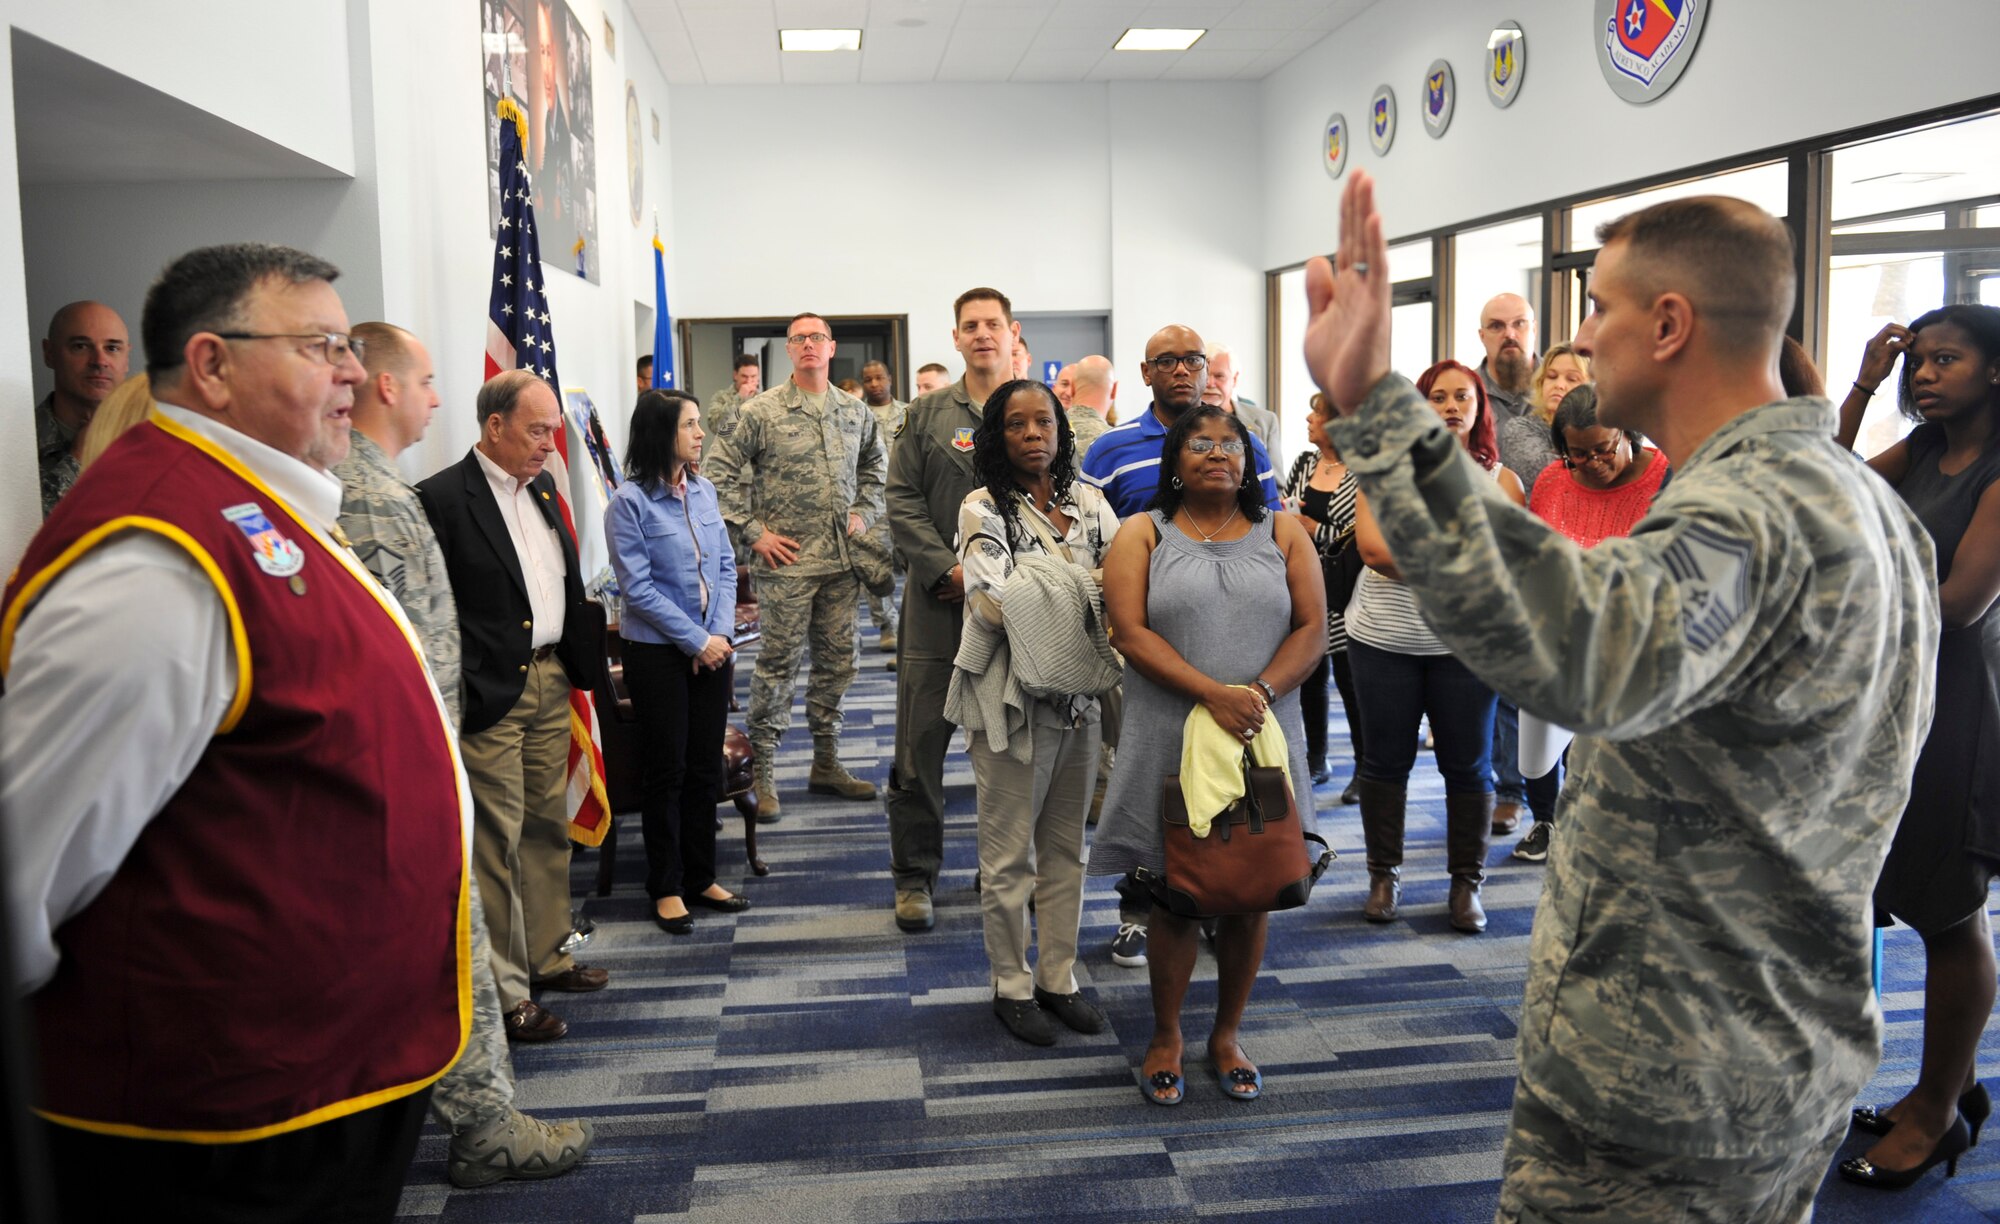 U.S. Air Force Senior Master Sgt. Robert Compton, Paul W. Airey NCO Academy director of education, prepares to lead a tour of the academy at Tyndall Air Force Base, Fla., Dec. 13, 2016. Each classroom throughout the academy is named after  enlisted Airmen  who were hand-picked by NCO Academy classes for their unwavering heroism and courage. (U.S. Air Force photo by Senior Airman Dustin Mullen/Released)